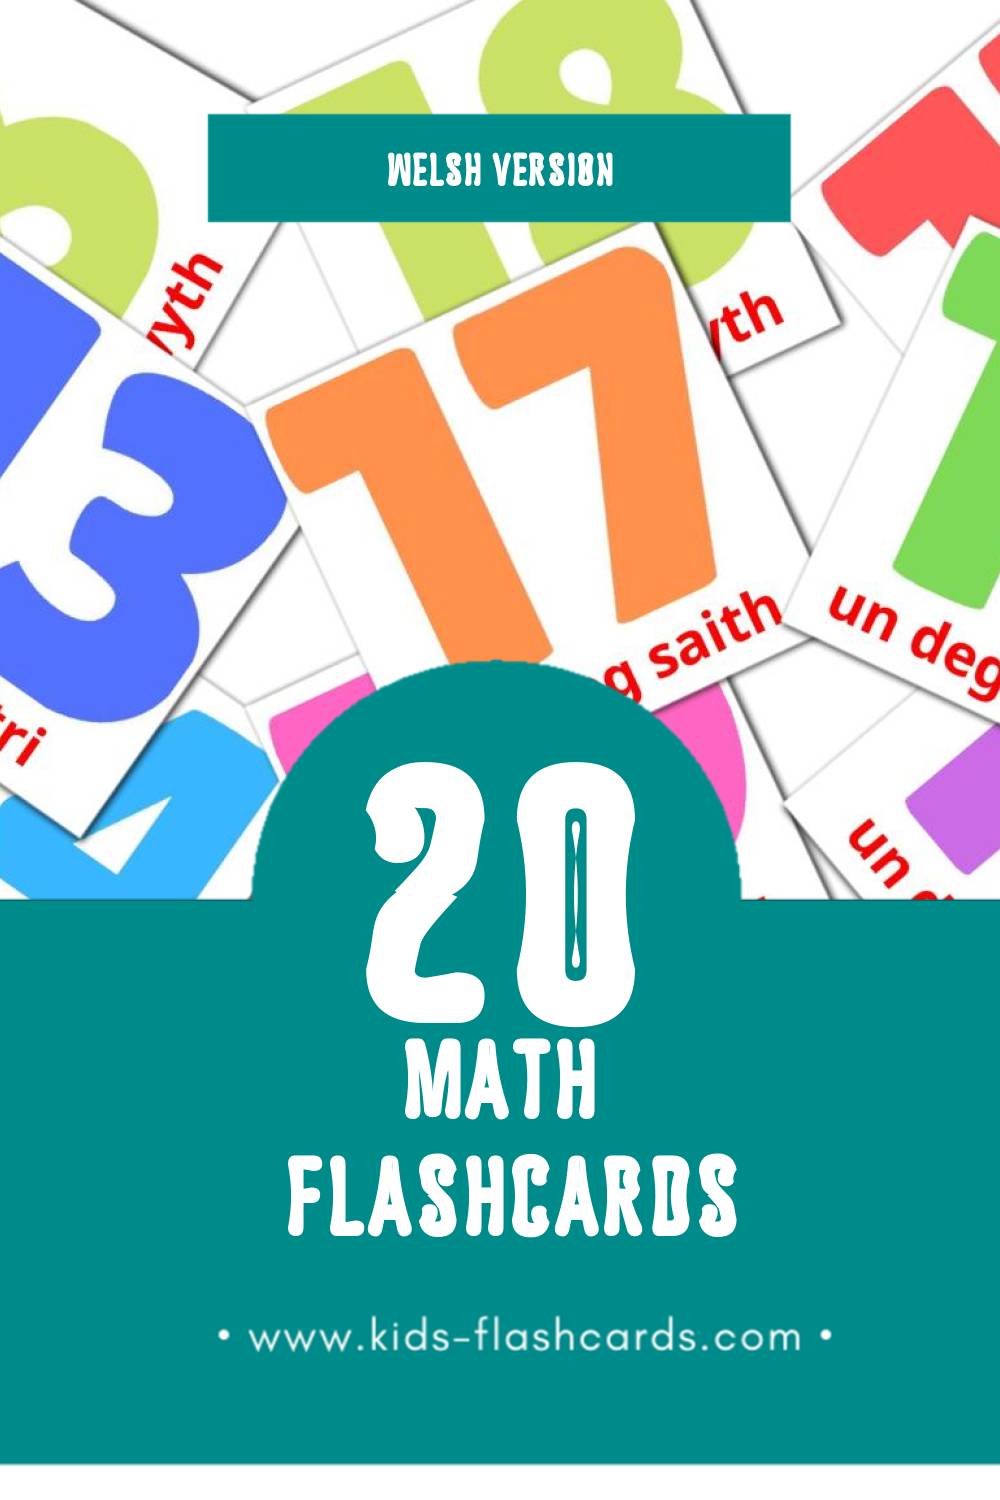 Visual Mathemateg Flashcards for Toddlers (20 cards in Welsh)